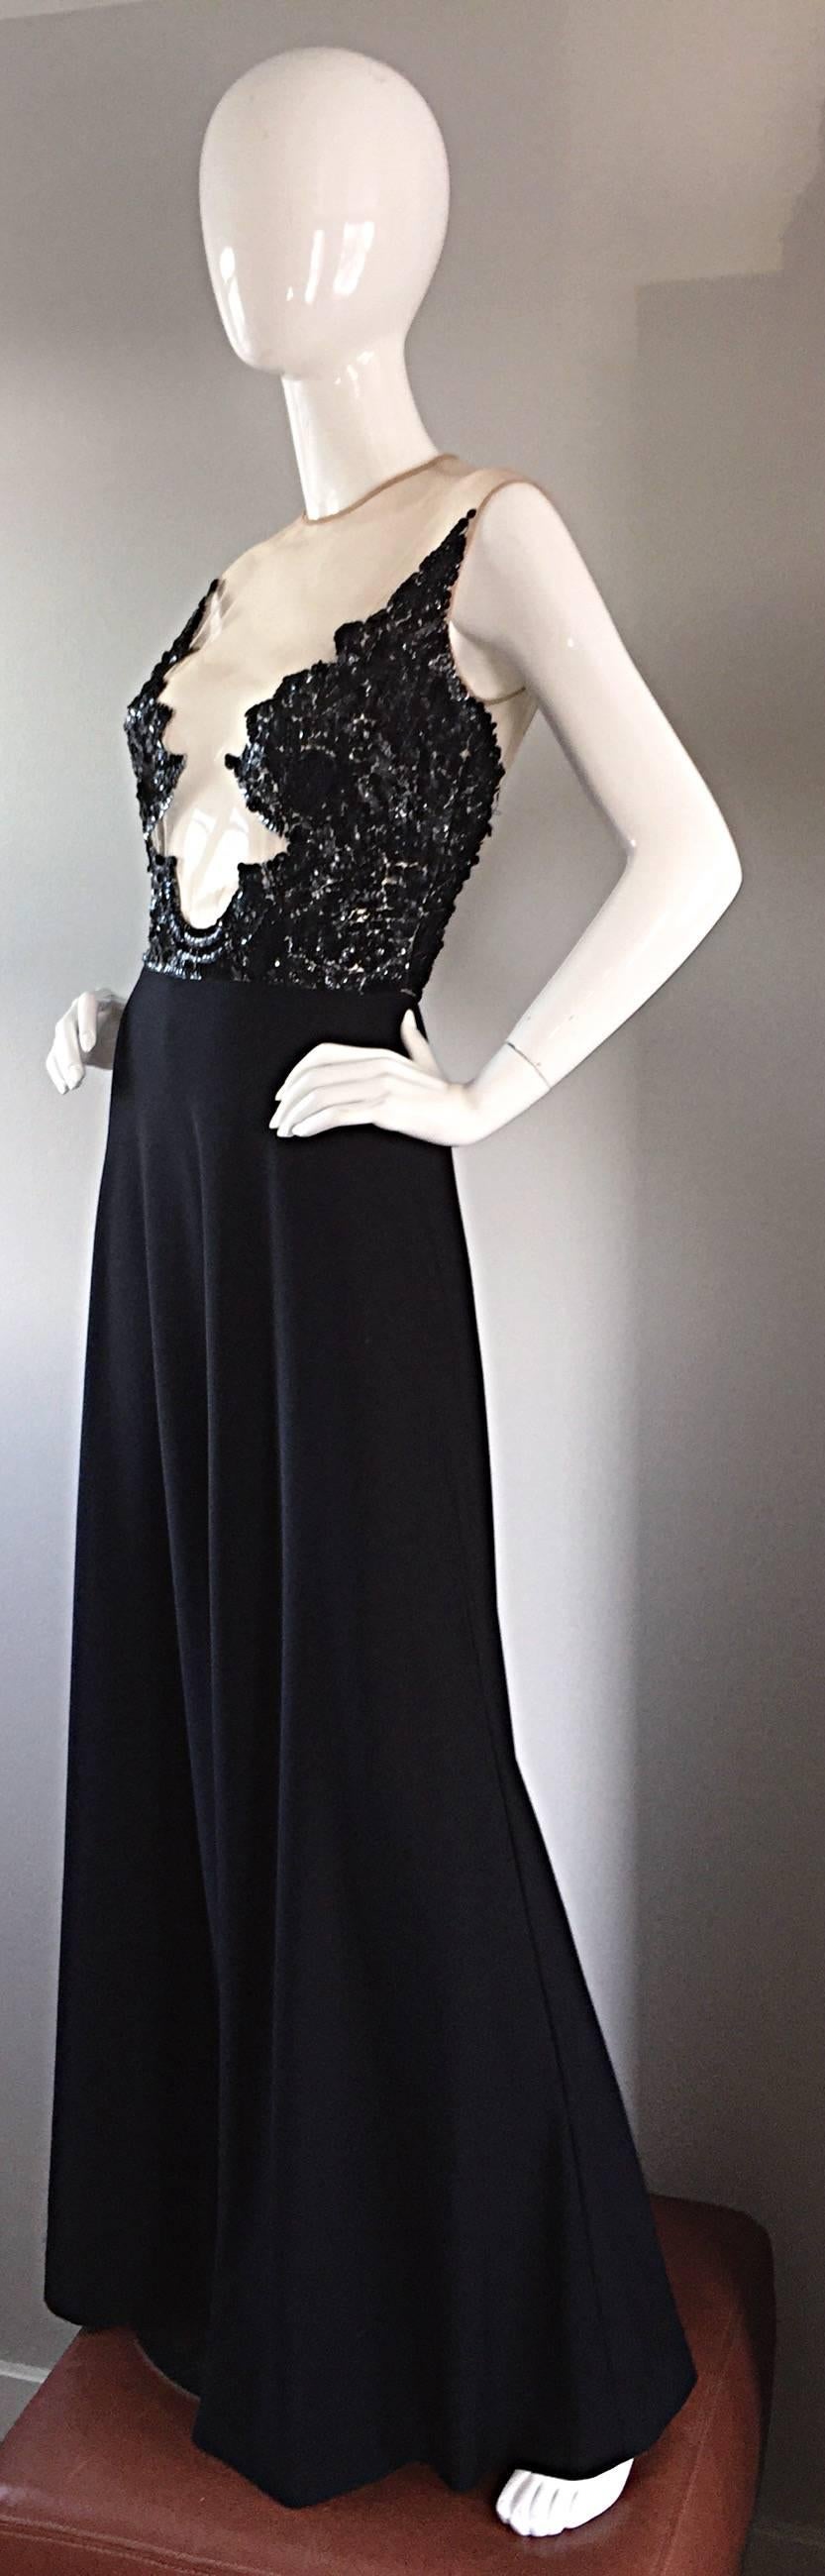 Women's Incredible 1970s Mr. Blackwell Vintage Nude Illusion Sequin Couture Black Gown  For Sale